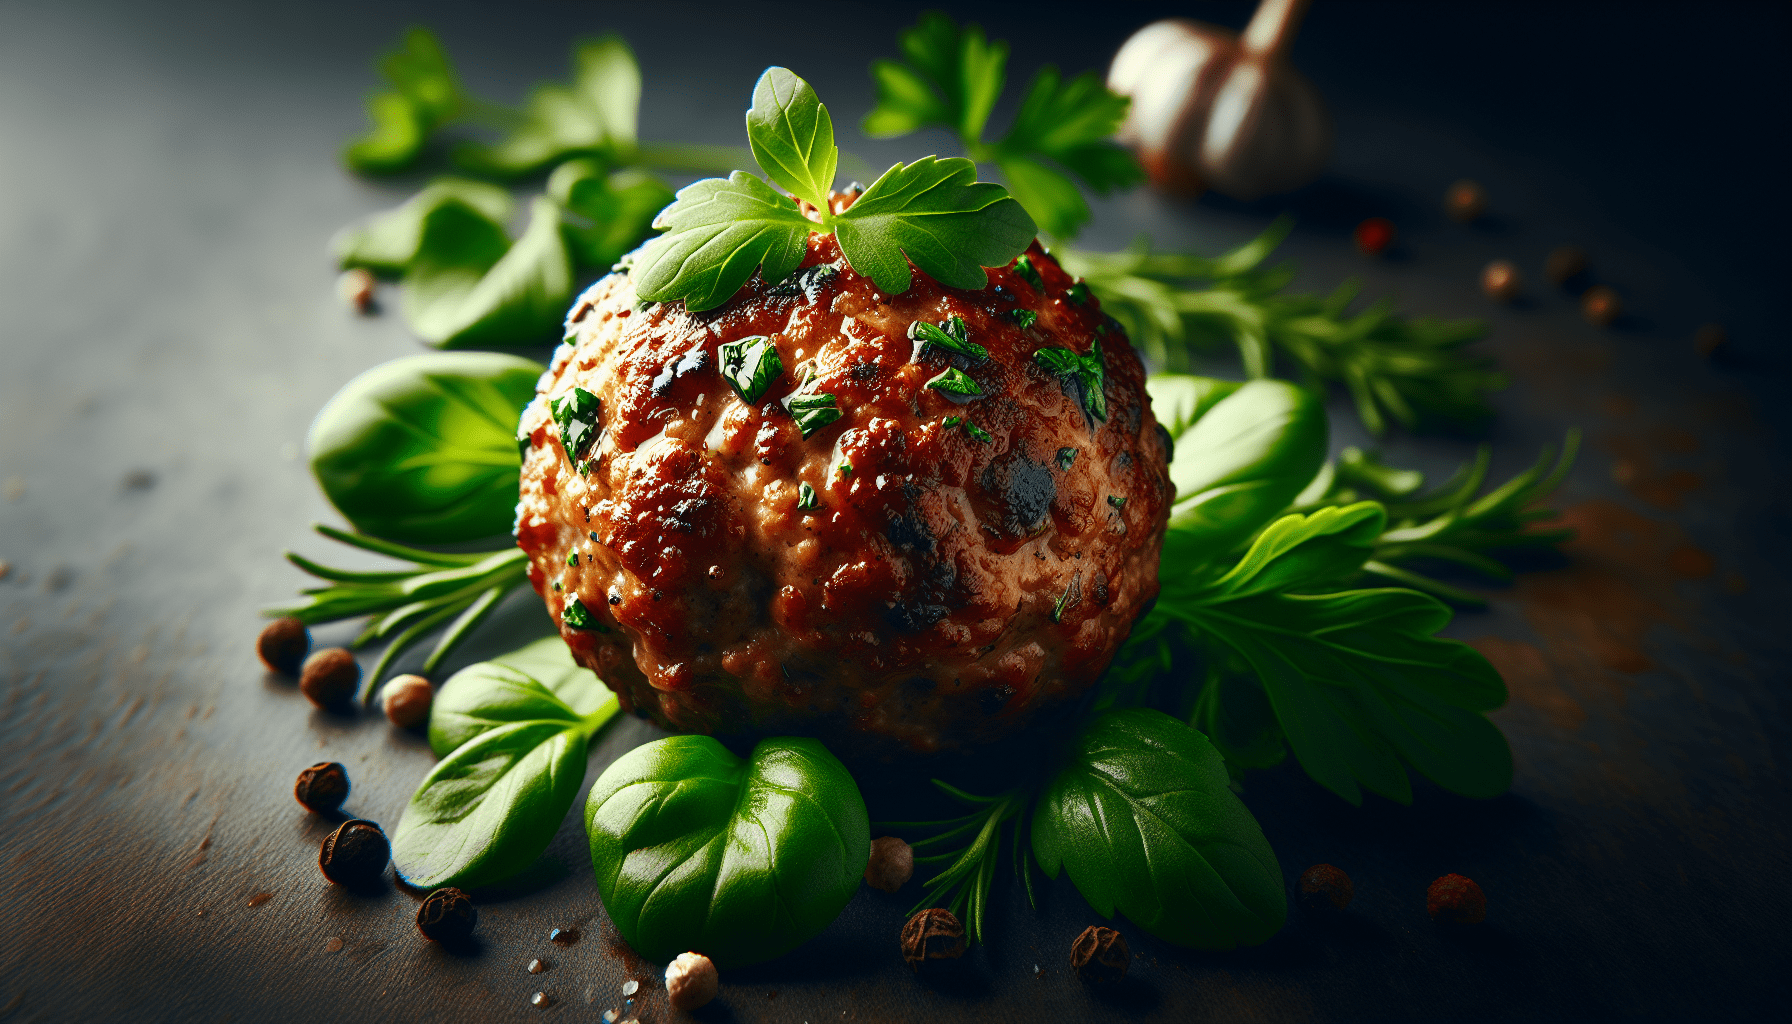 Delicious Meatball Recipes for Simple Carnivore Diet Weeknight Dinners